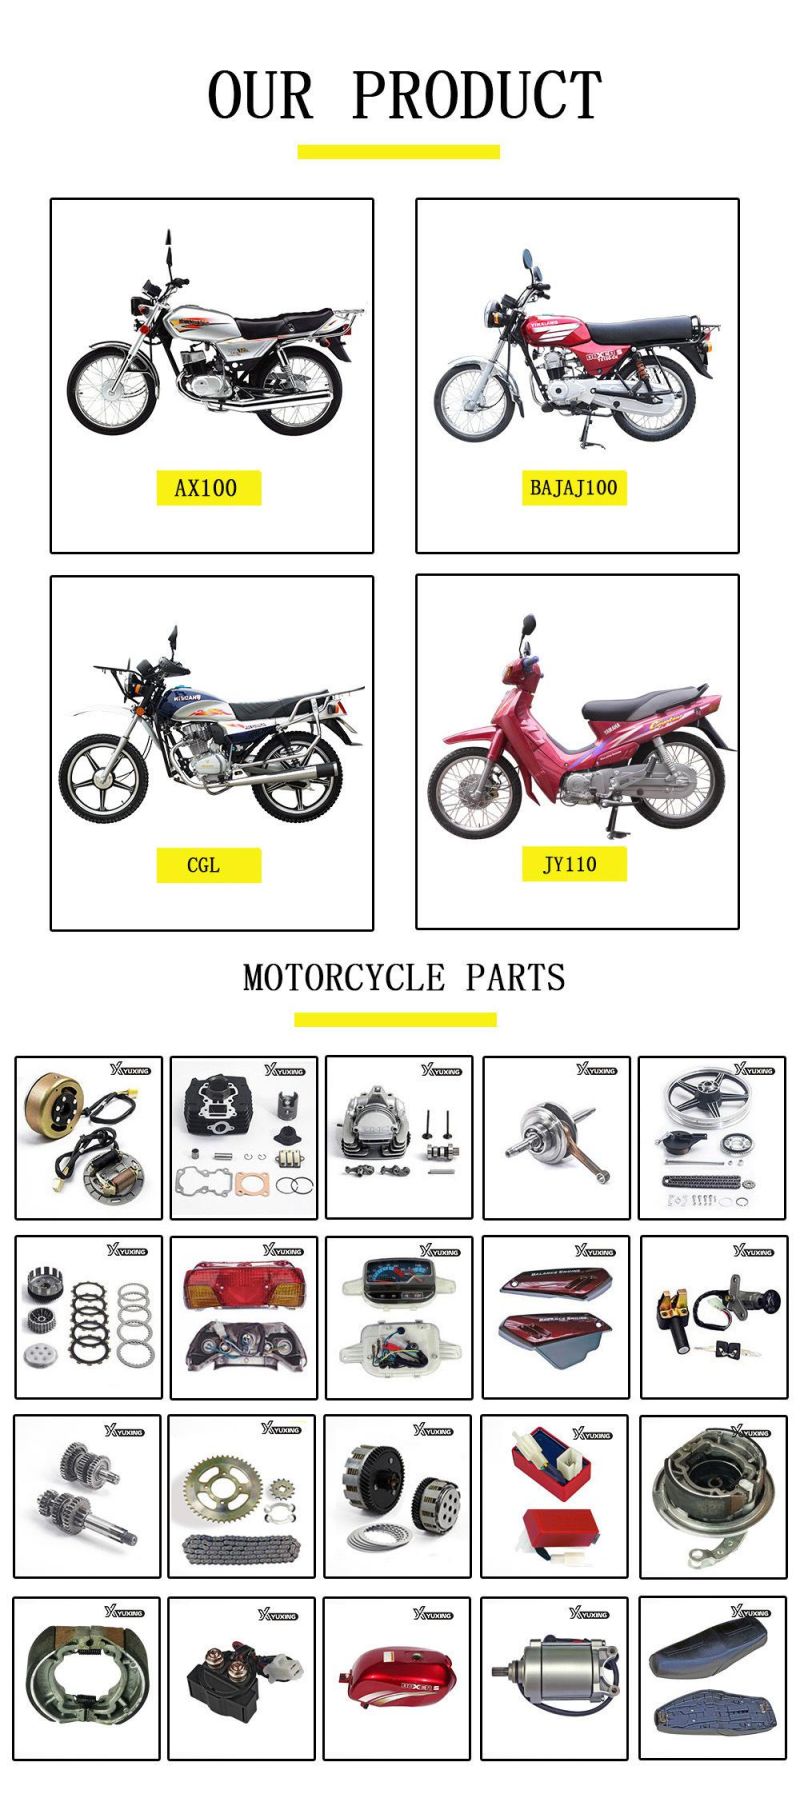 Motorcycle Spare Parts Scooter Engine Maintenance-Free 12n6.5-BS 12V6.5ah Motorcycle Battery for Motorbike